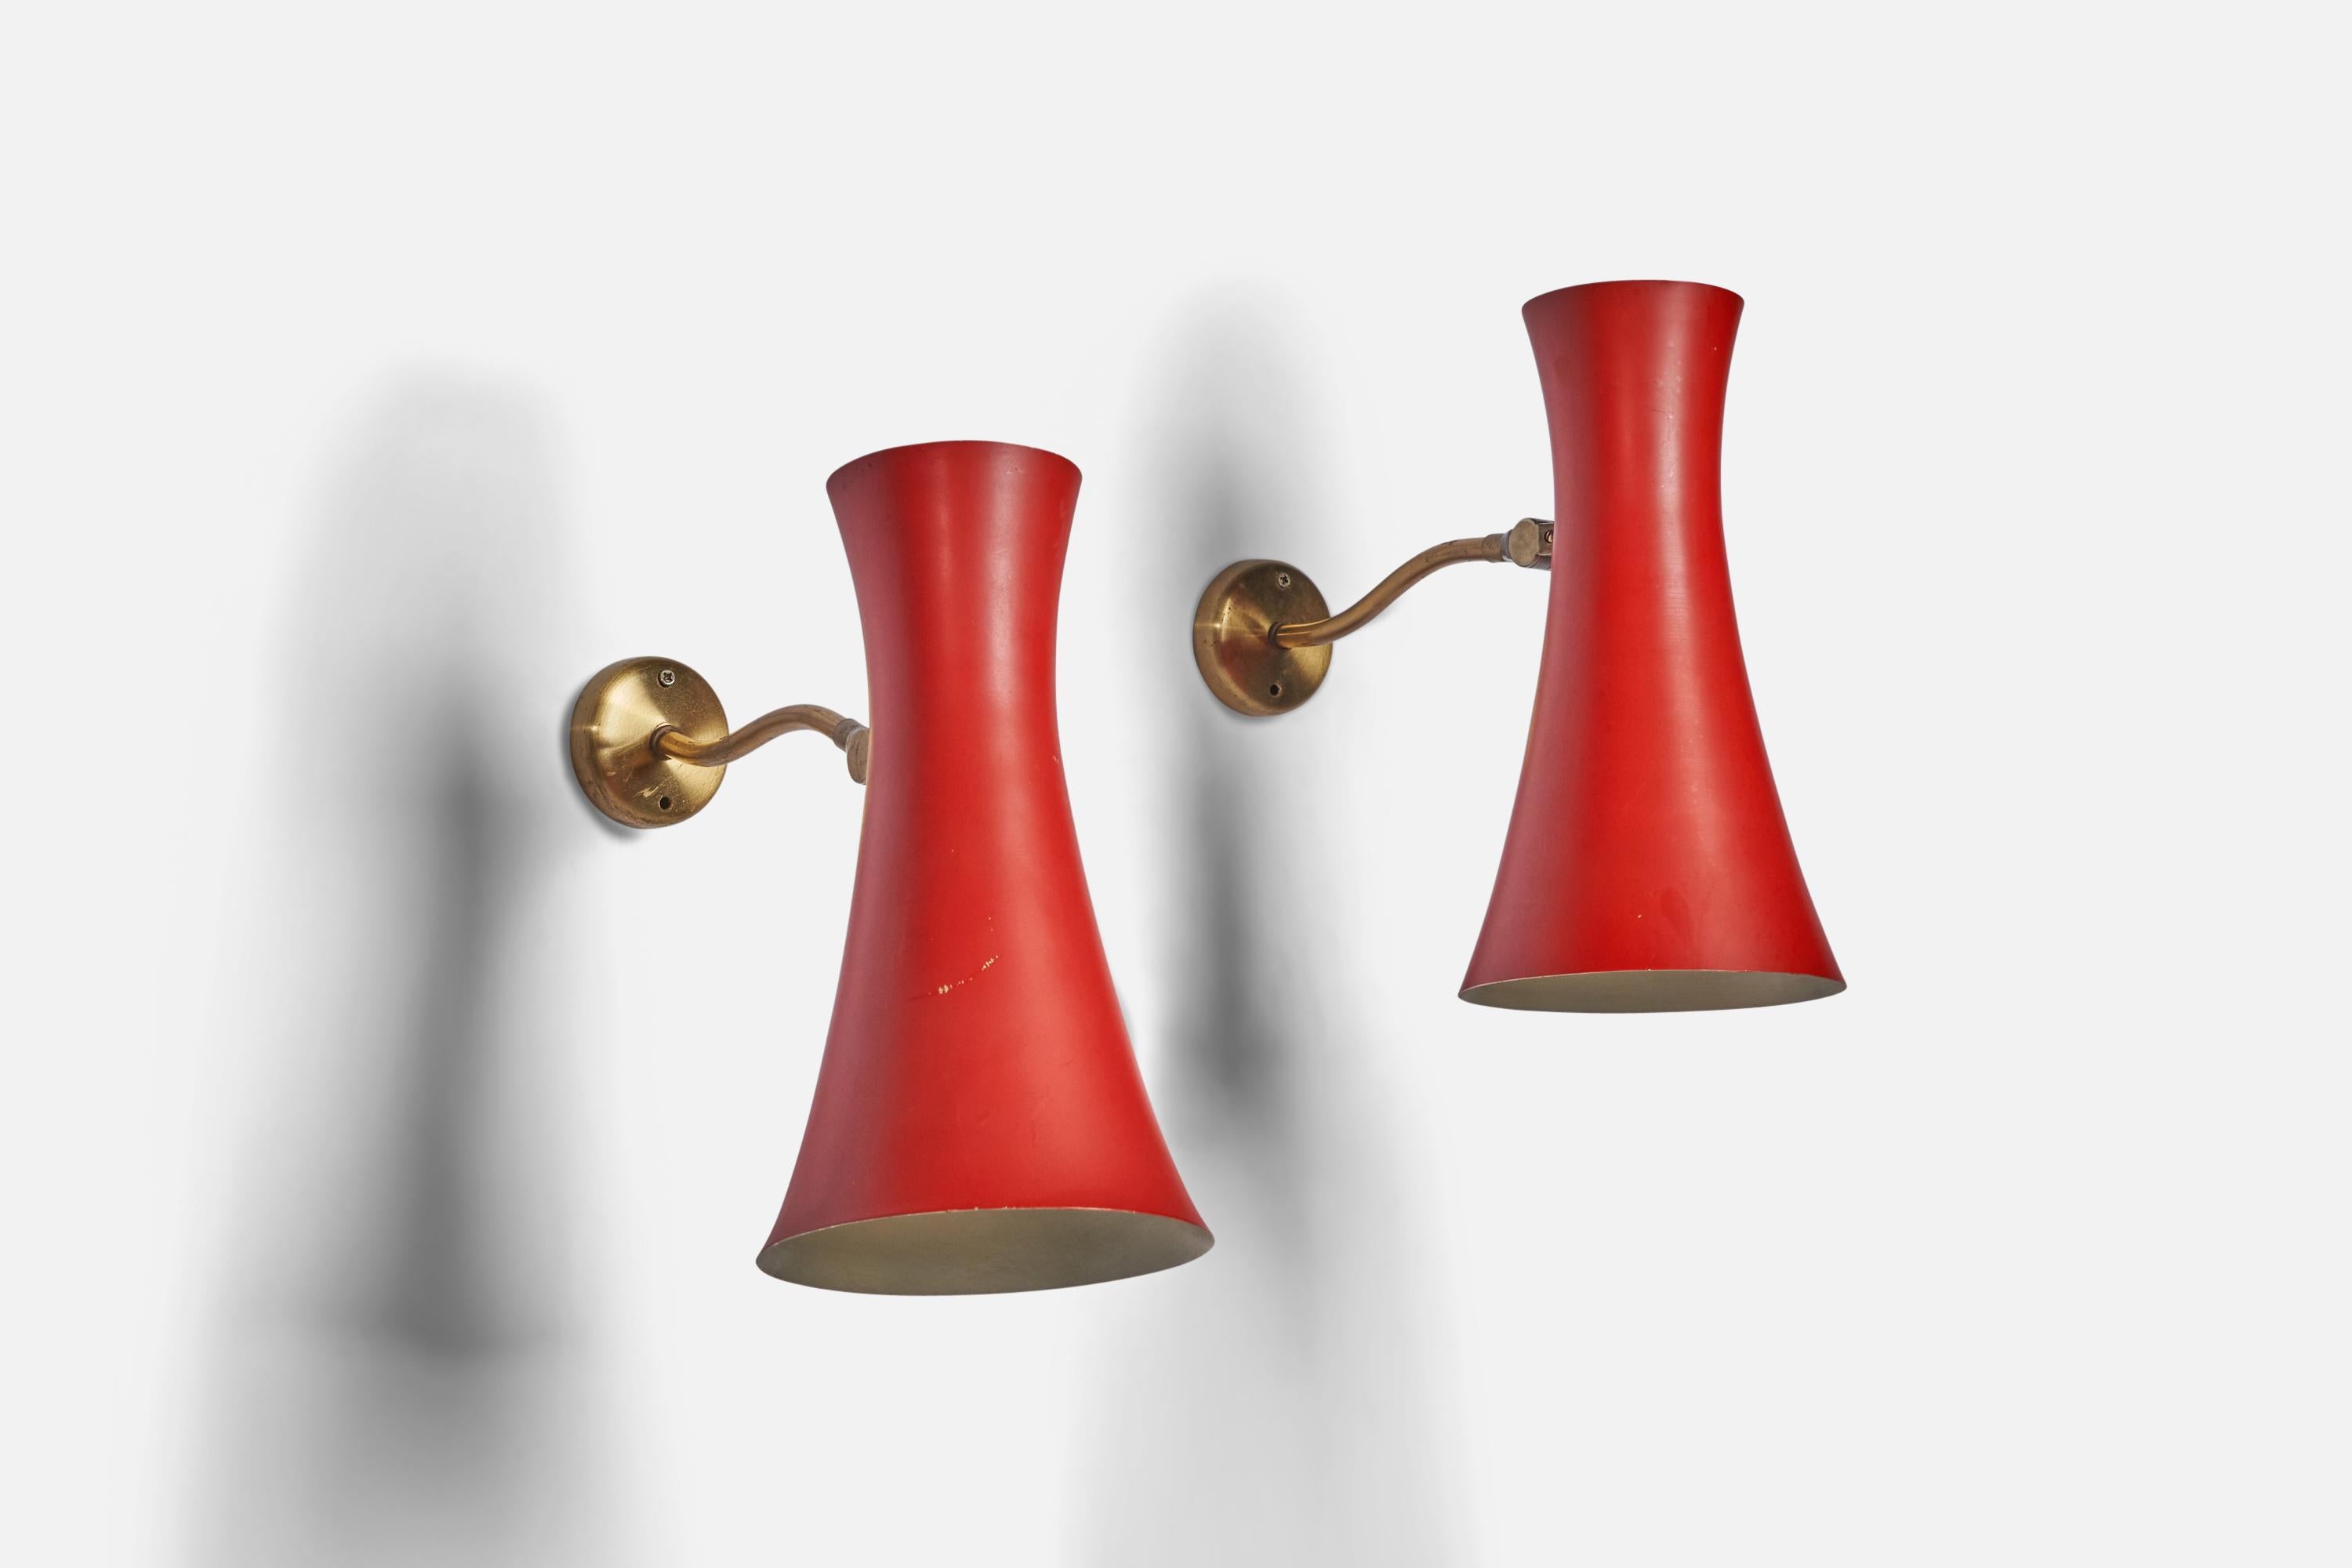 A pair of adjustable brass and red-lacquered metal wall lights designed and produced in Sweden, c. 1950s.

Overall Dimensions (inches): 10.55” H x 5.75” W x 14” D
Bulb Specifications: E-26 Bulb
Number of Sockets: 1
All lighting will be converted for